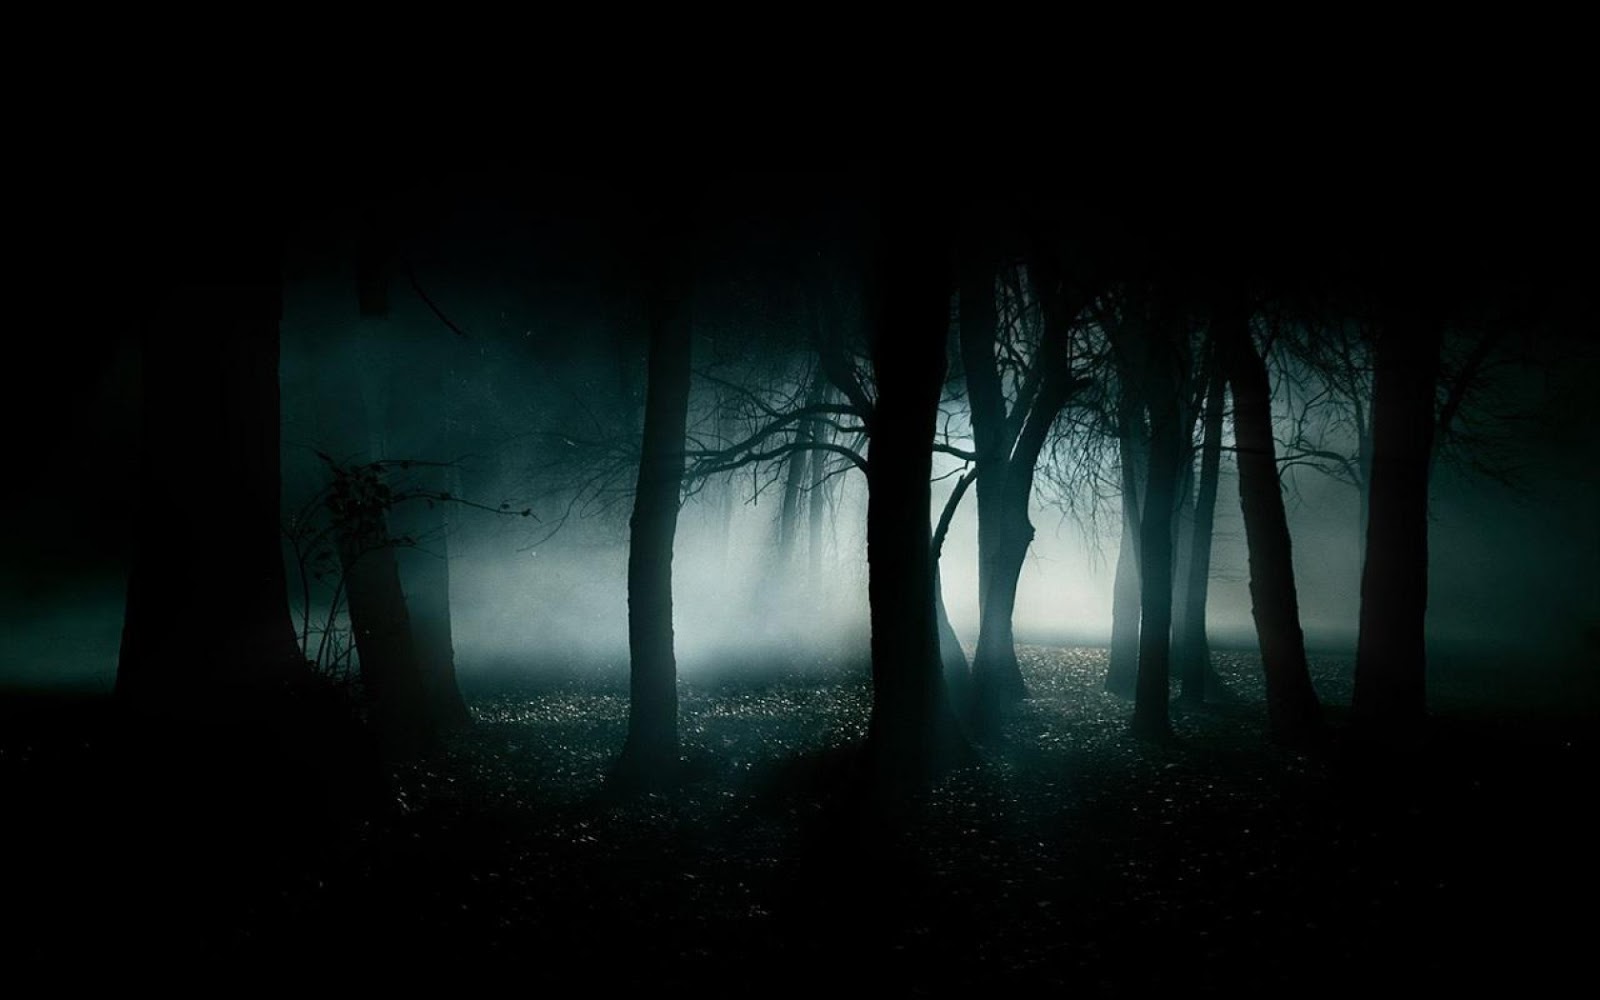 ... The fog would permeate the forests and gave them an odd mystical feel